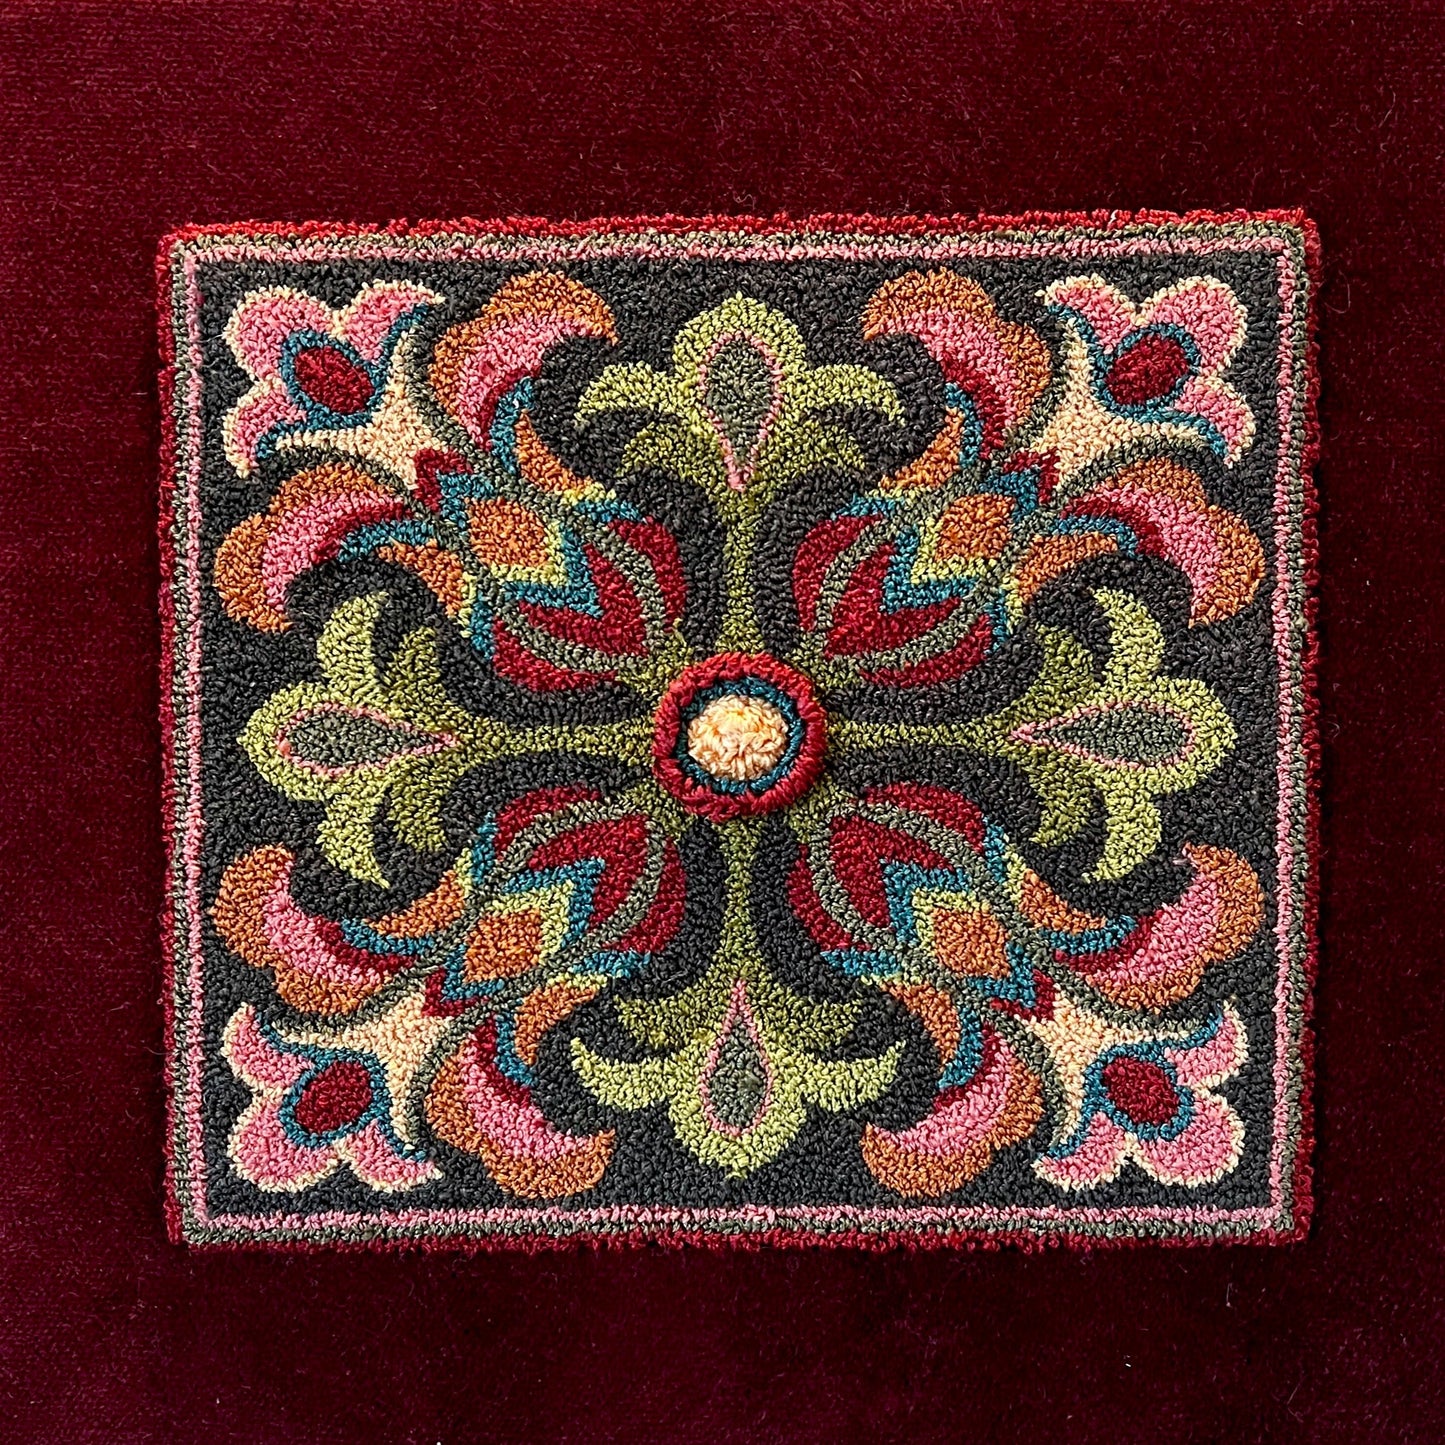  Tuscan Bloom Needle Punch Pattern by Orphaned Wool, Copyright © 2023 Kelly Kanyok. This flower design pattern was inspired by the vibrant color in Tuscany.